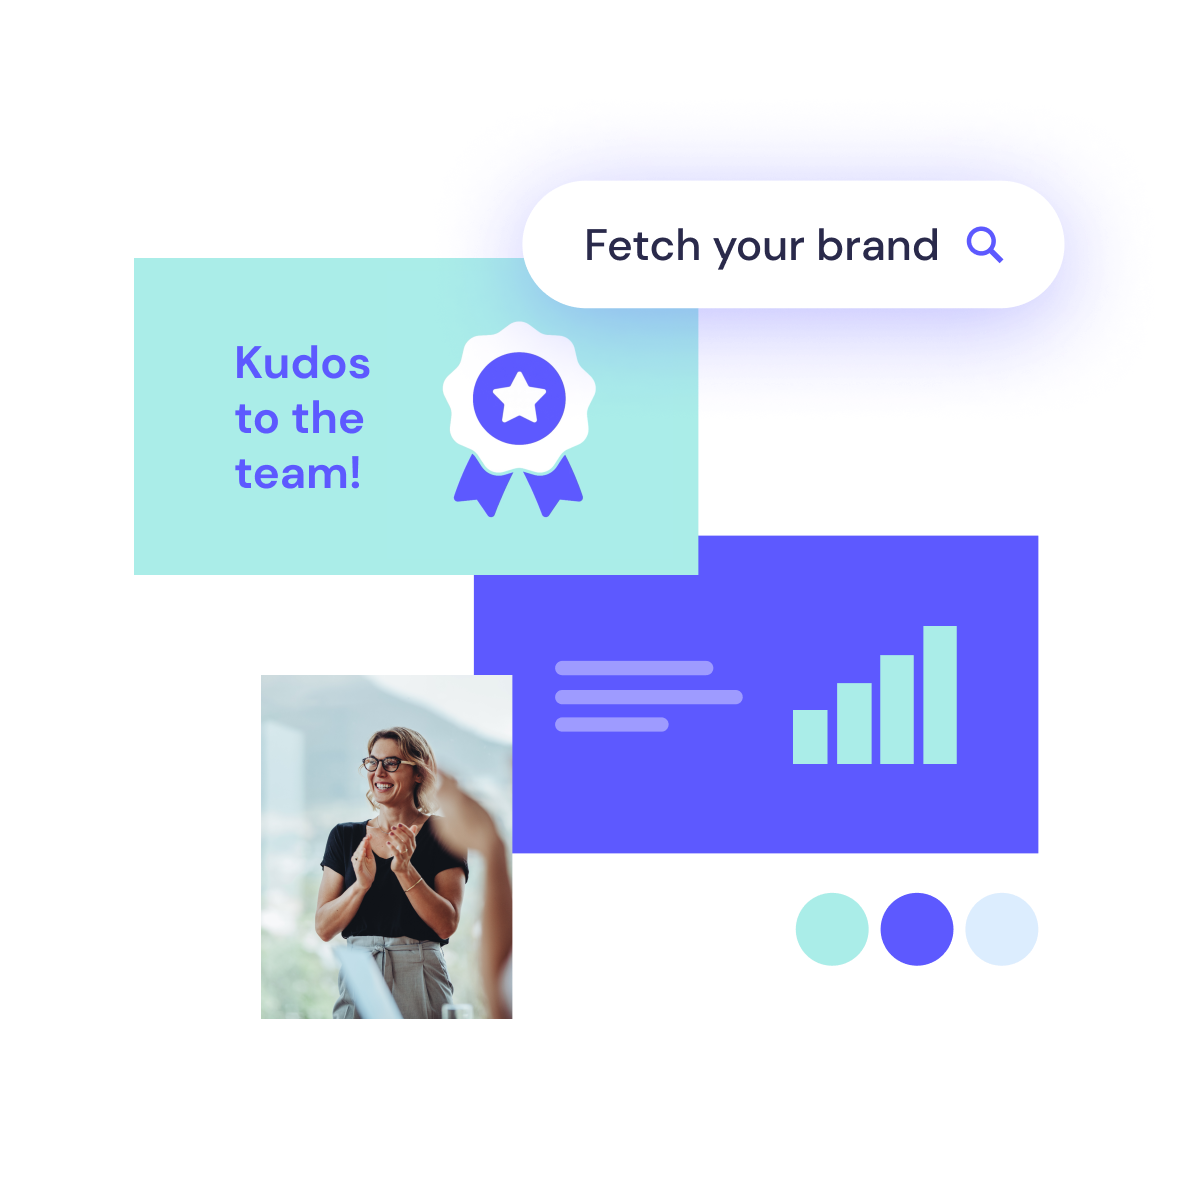 A digital collage representing brand interaction, with features such as a search bar, analytics, a success badge, and an applauding woman created with Biteable video maker.